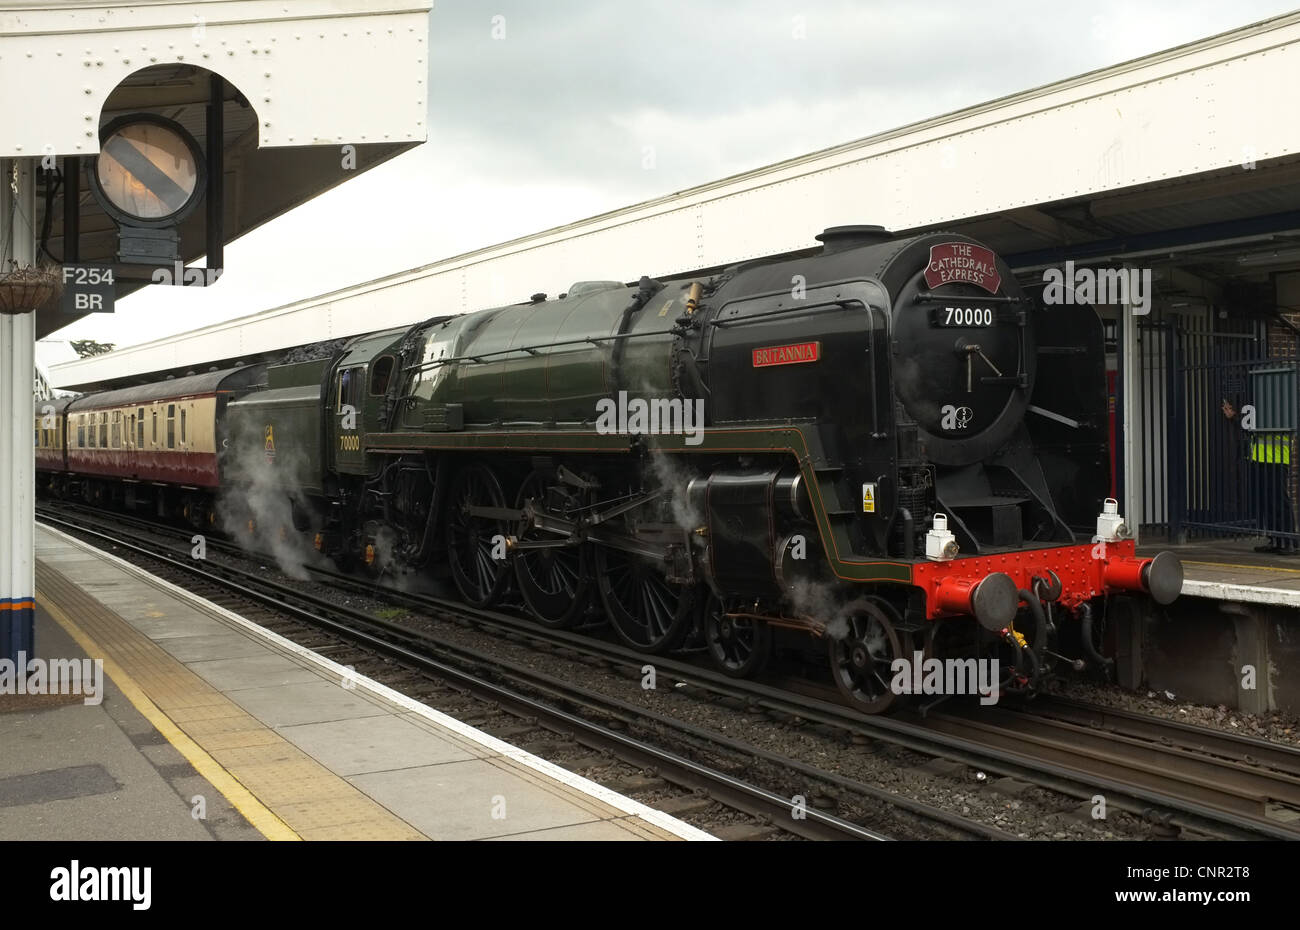 Steam Locomotive 'Britannia' heads The Cathedrals Express at Staines -1 Stock Photo